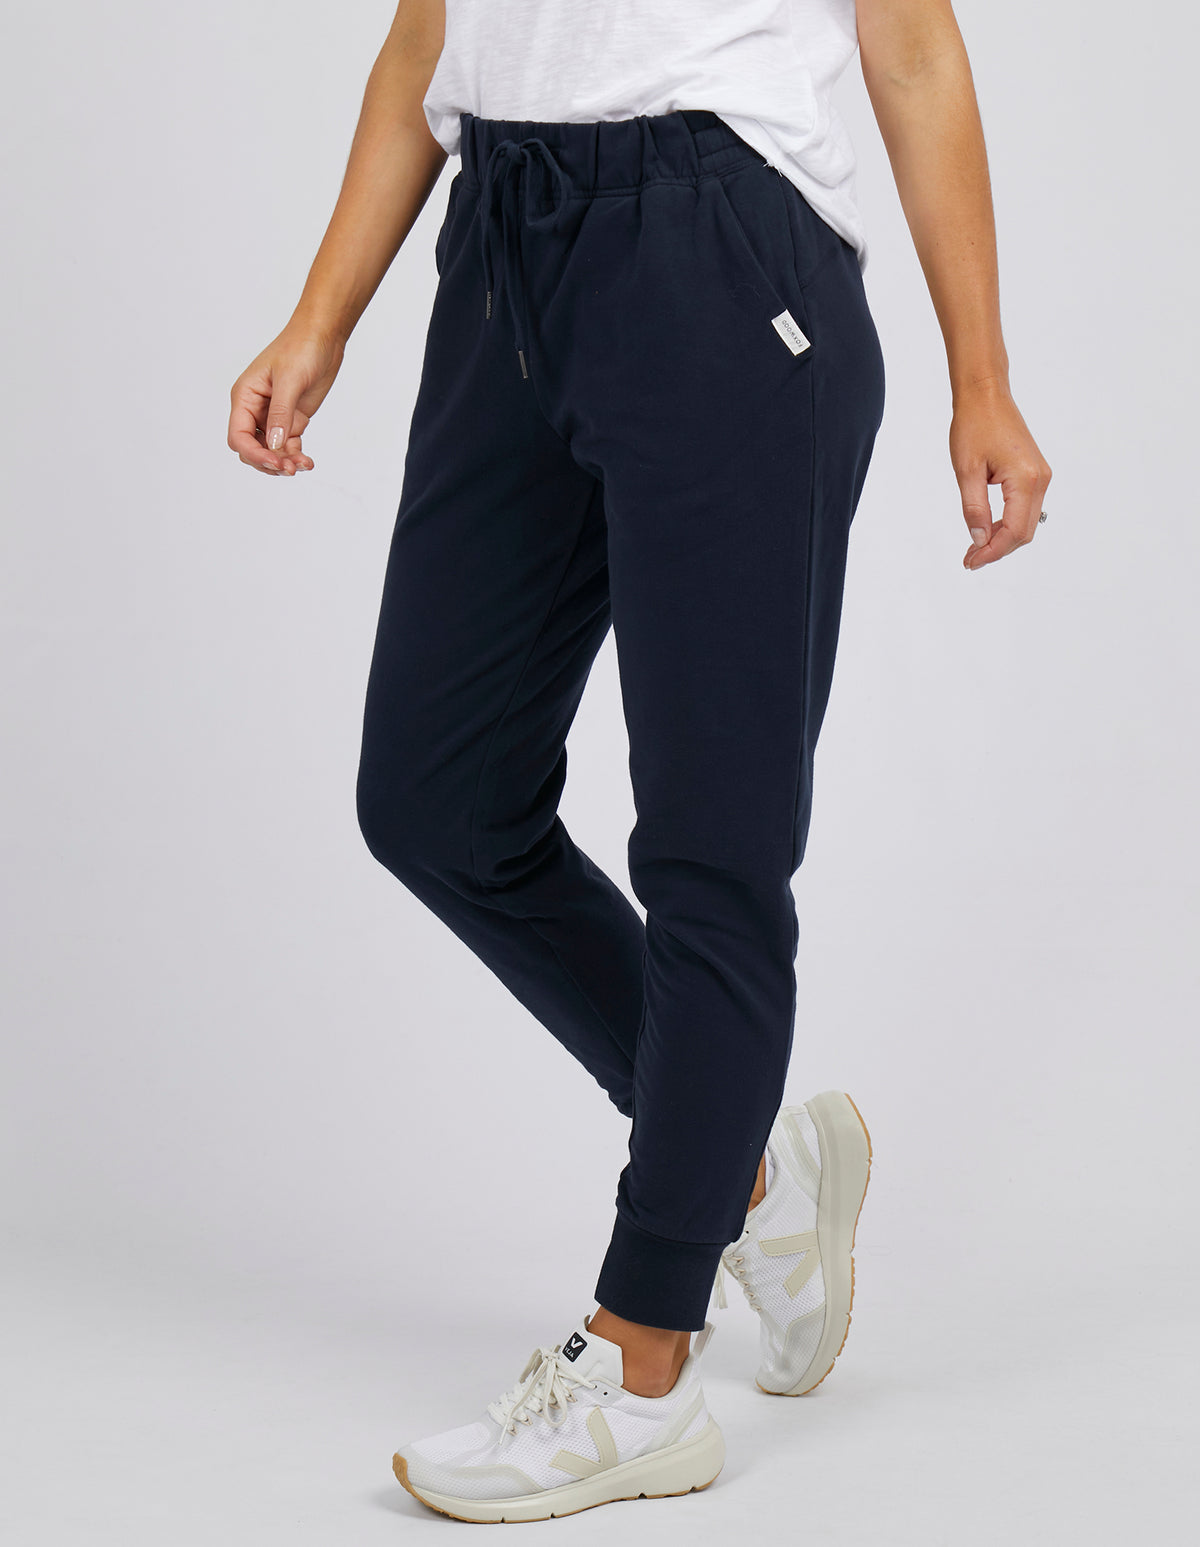 Lazy Days Pants - Navy - Foxwood - FUDGE Gifts Home Lifestyle